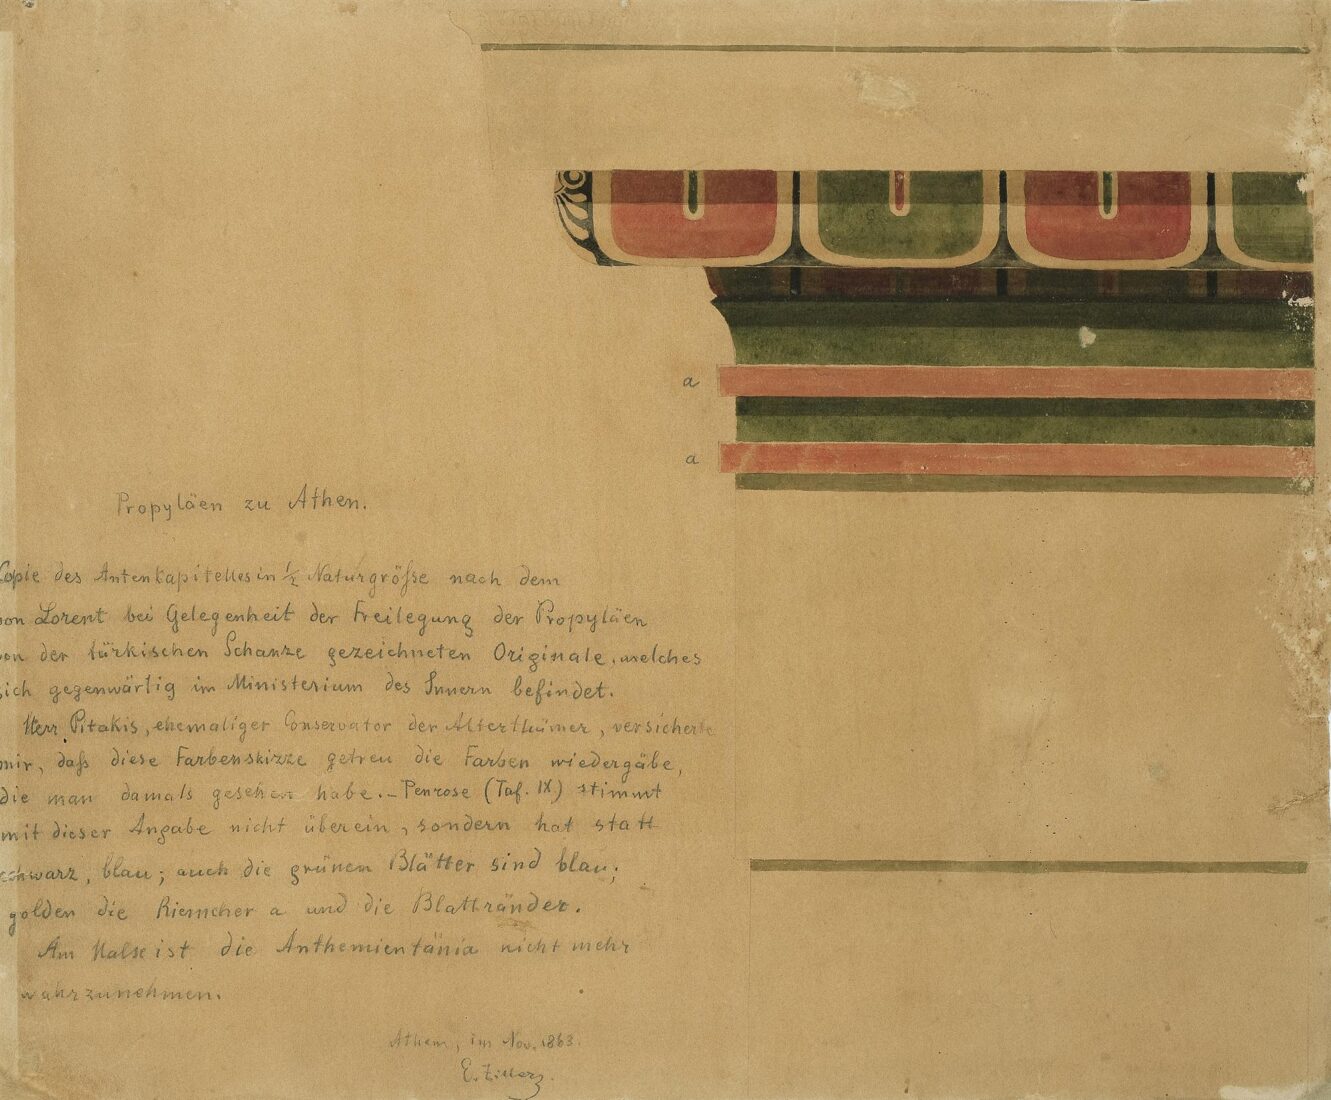 Acropolis. Polychromy Study of a Pilaster-Capital of the Interior of the Pinakotheke in the Propylaea at Half of Full Scale - Ziller Ernst